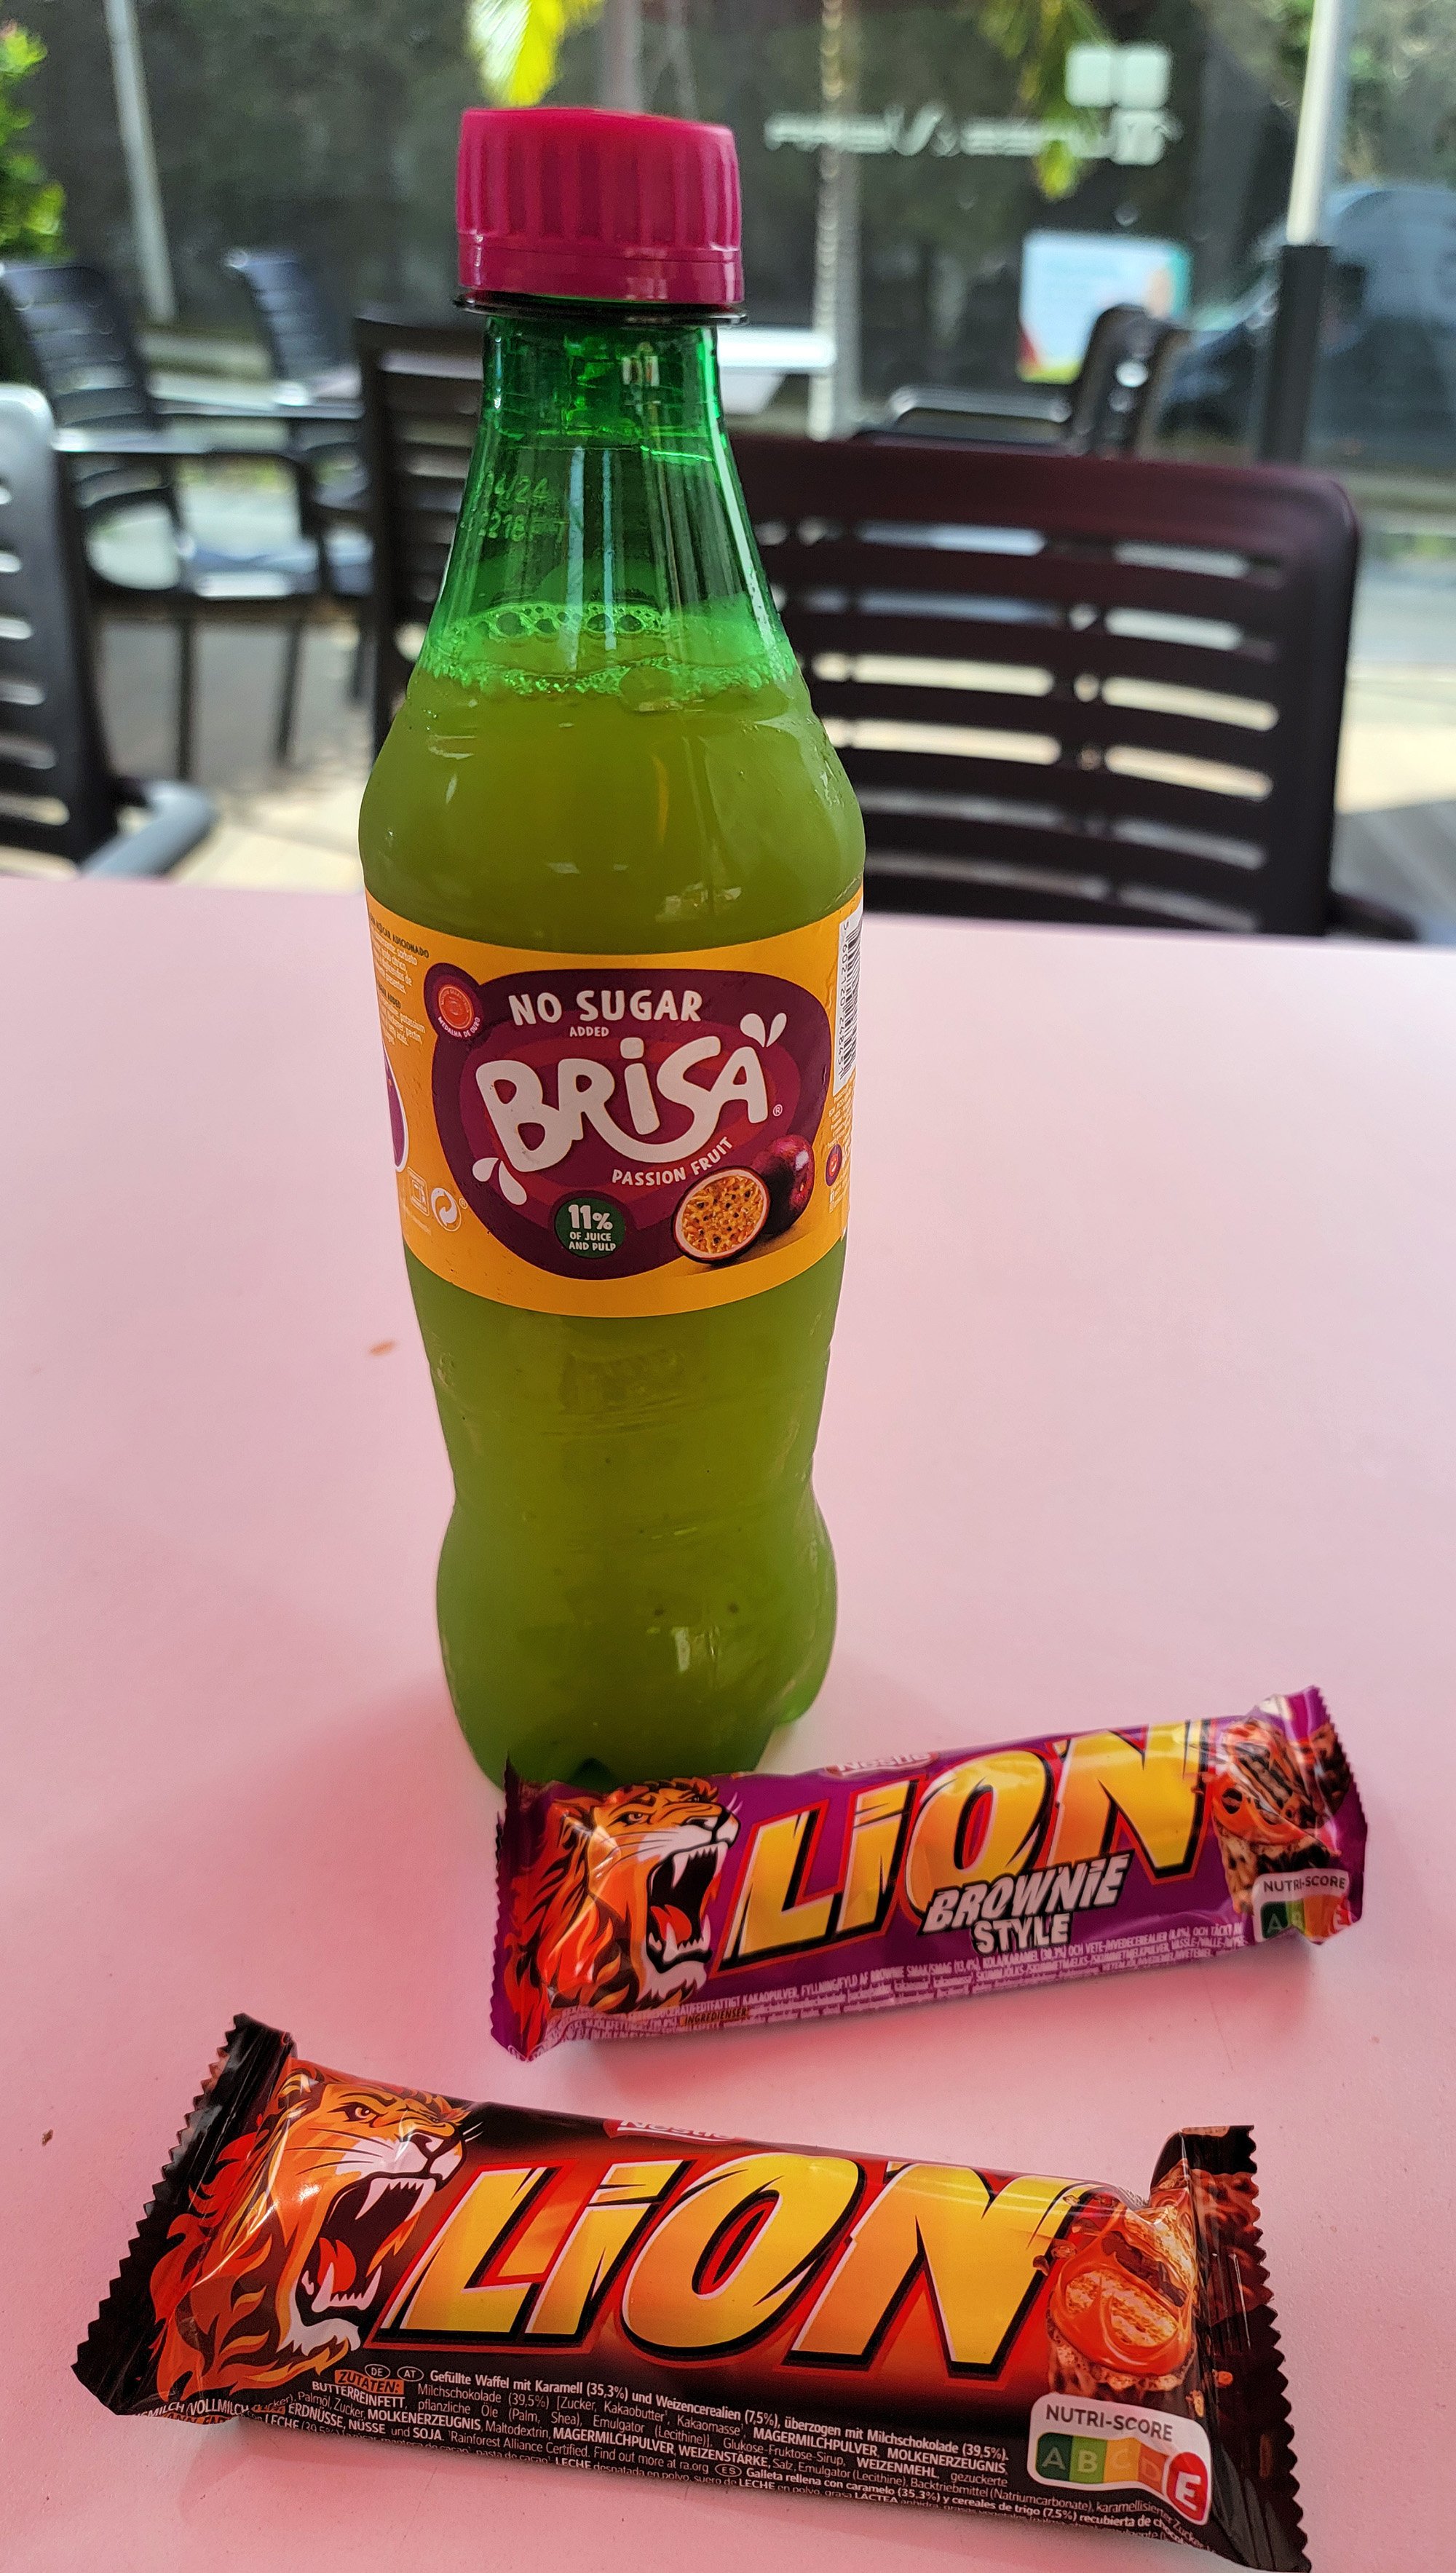 Passionfruit flavored soft drink, "Brisa". I approve. The candy bar is pretty generic. I think everyone's figured out how to make candy bars by now.